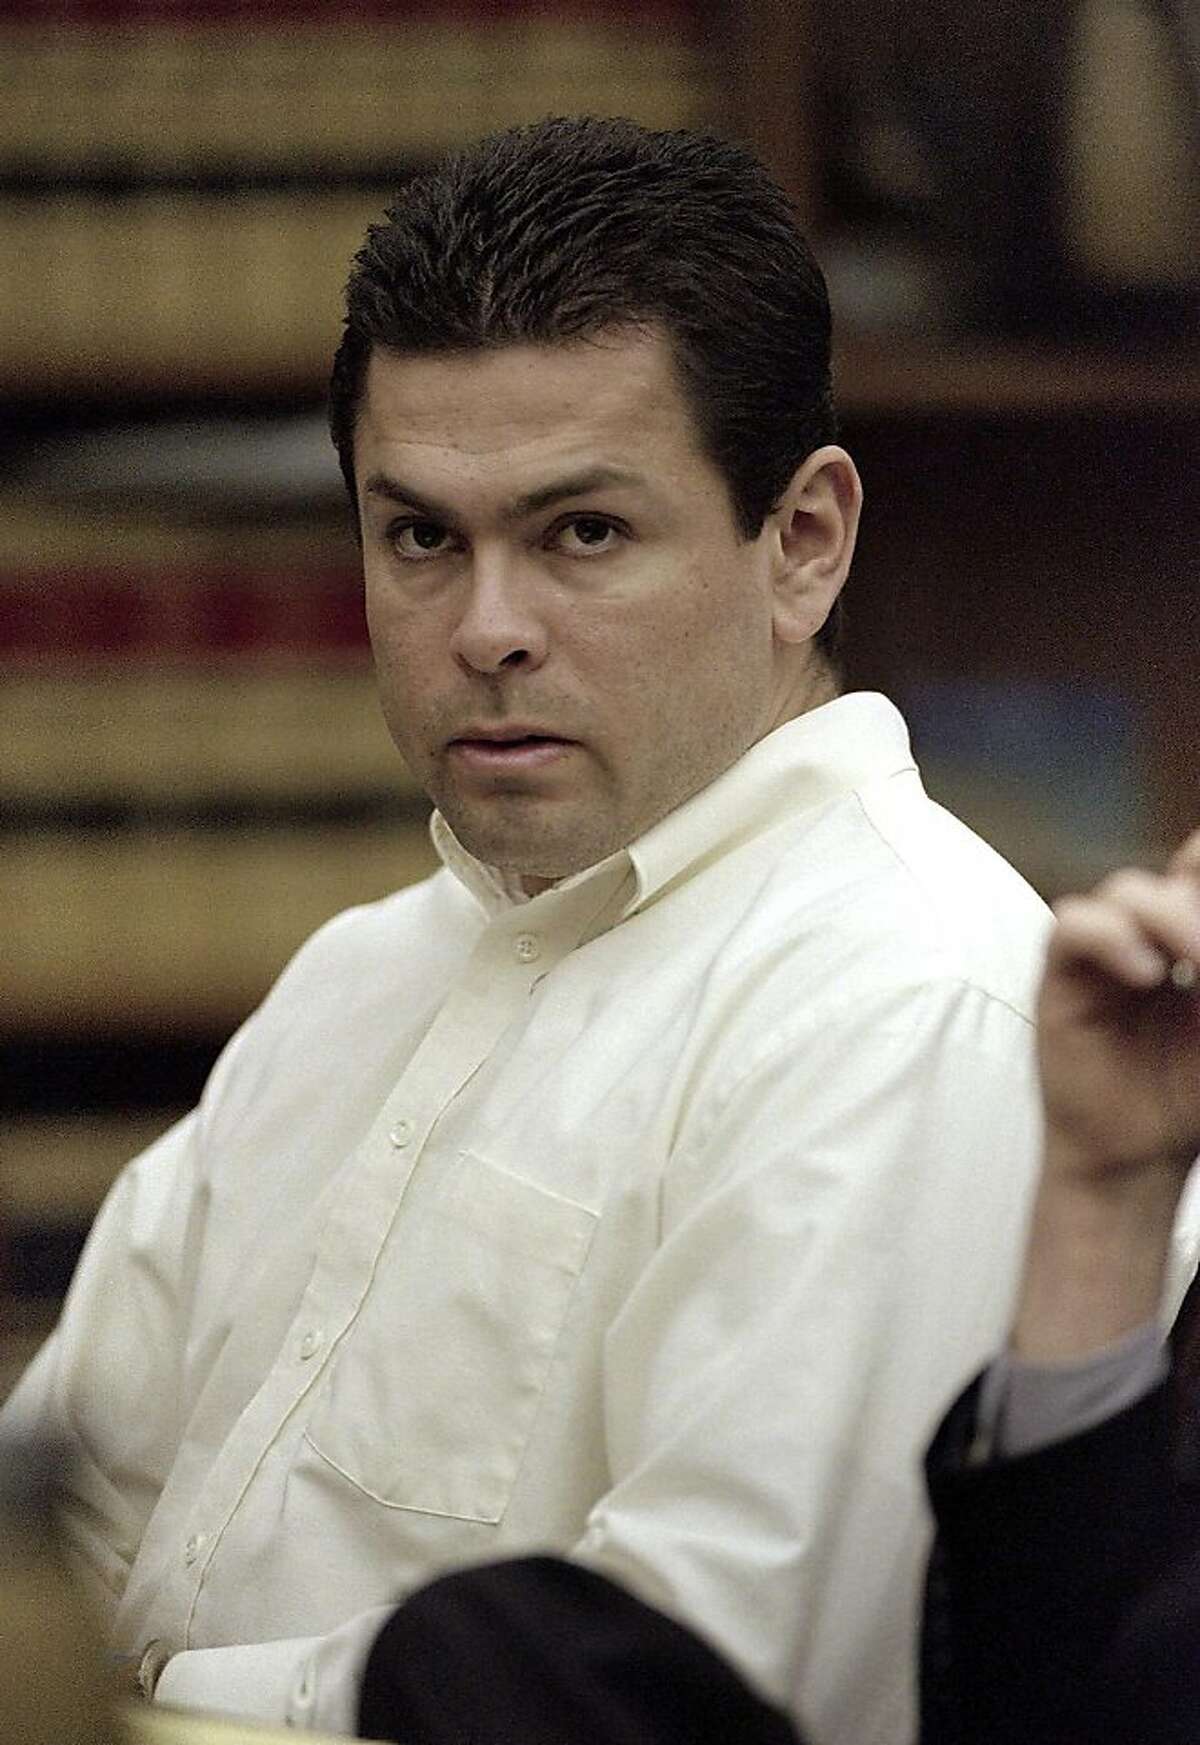 SENTENCING in San Diego Superior Courty of STEVEN MARTINEZ IN KIDNAPPING, RAPE CASE. 12/28/1998. Photo by San Diego Union-Tribune.